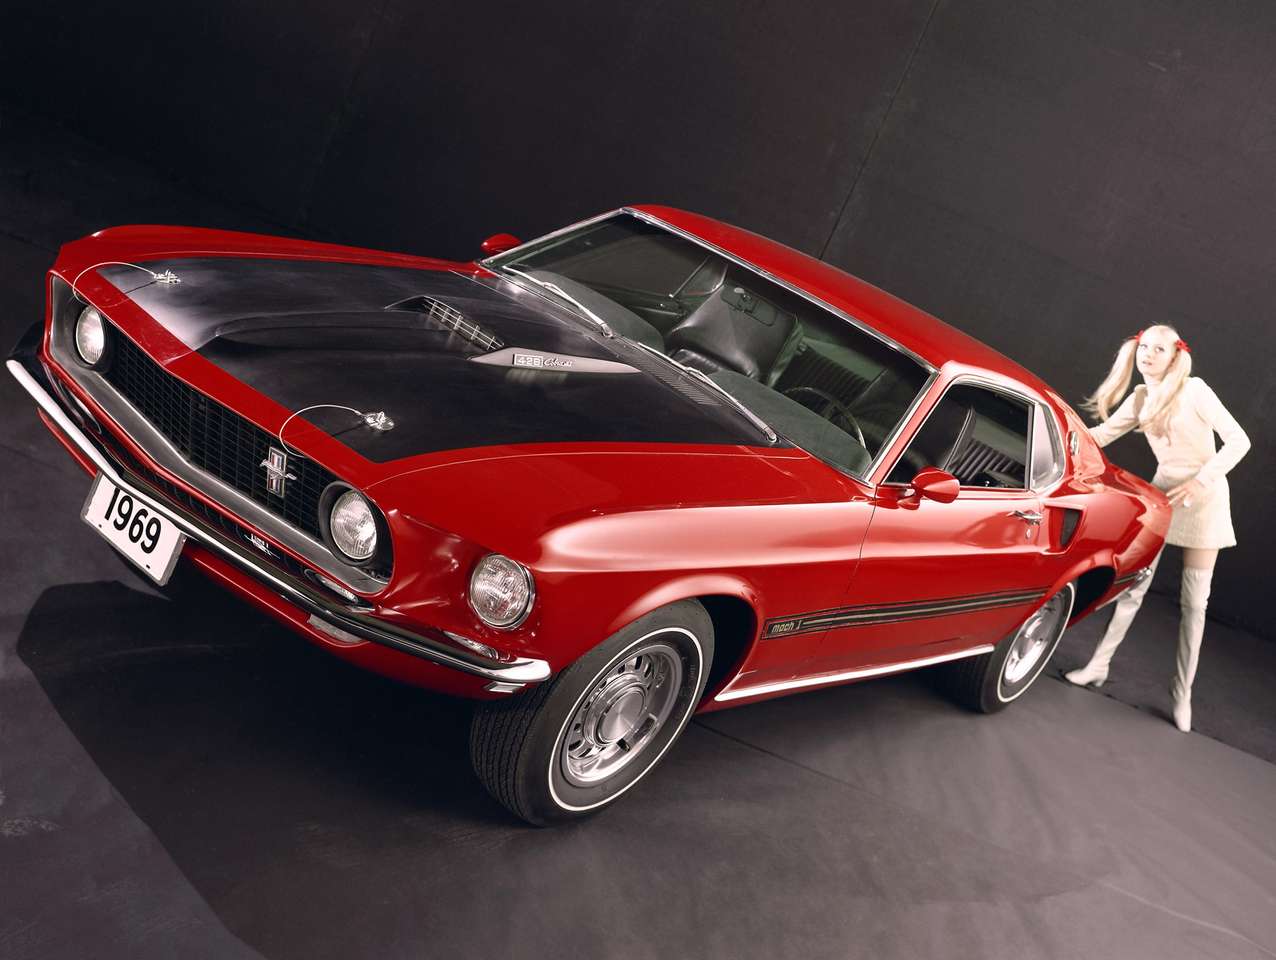 1969 Ford Mustang Mach 1 428 Super Cobra Jet puzzle online